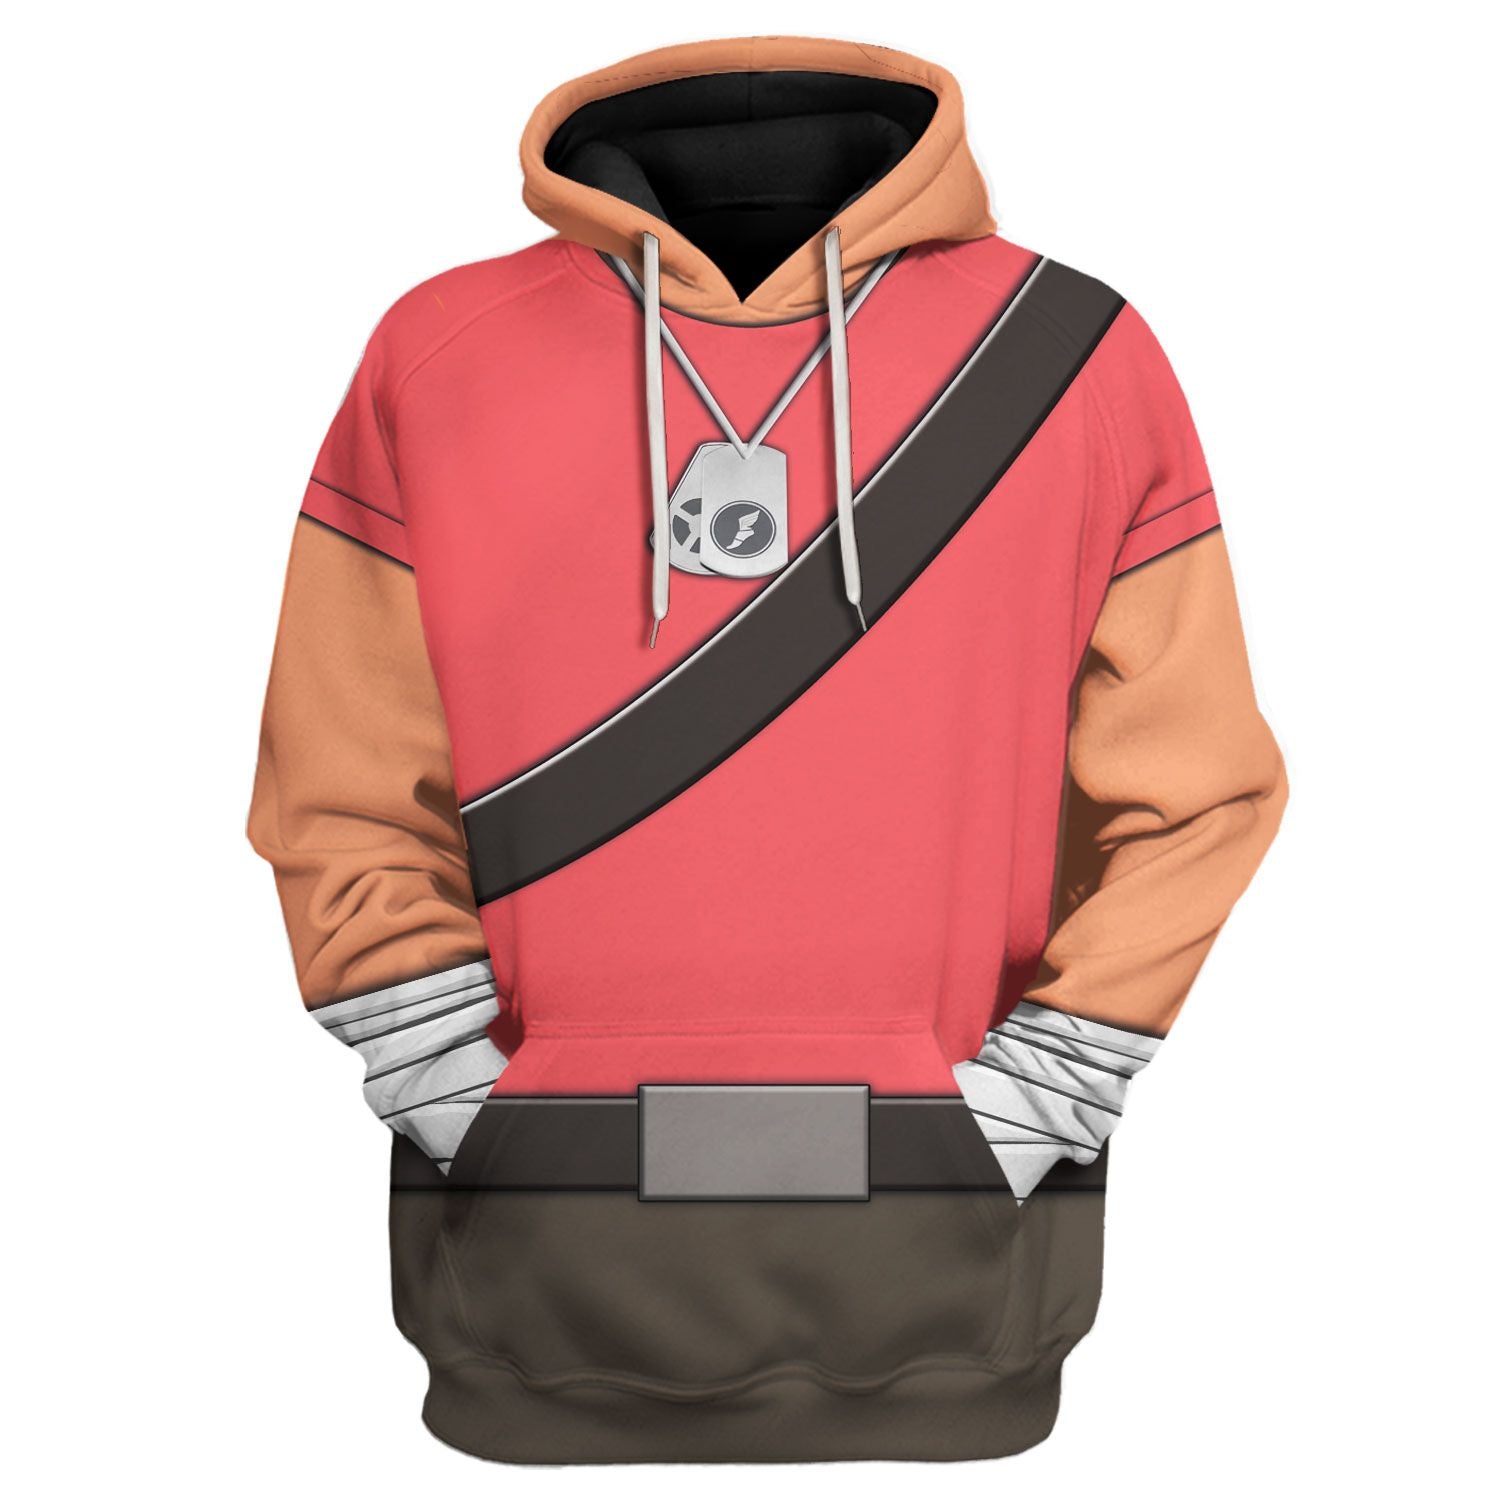 Scout TF2 hoodie